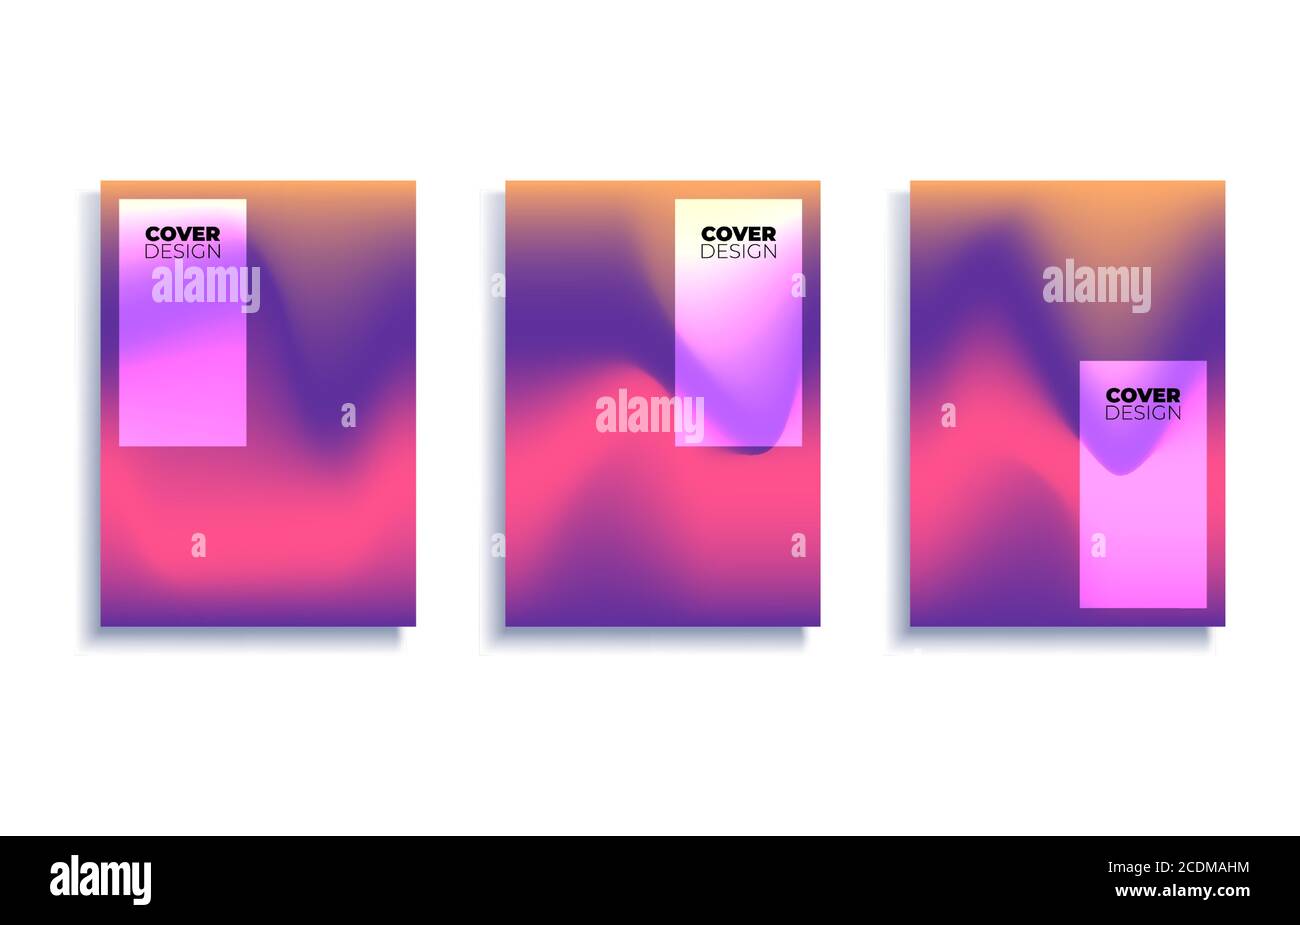 Set of covers design templates with vibrant gradient background. Trendy modern design. Applicable for placards, banners, flyers, presentations, covers Stock Vector